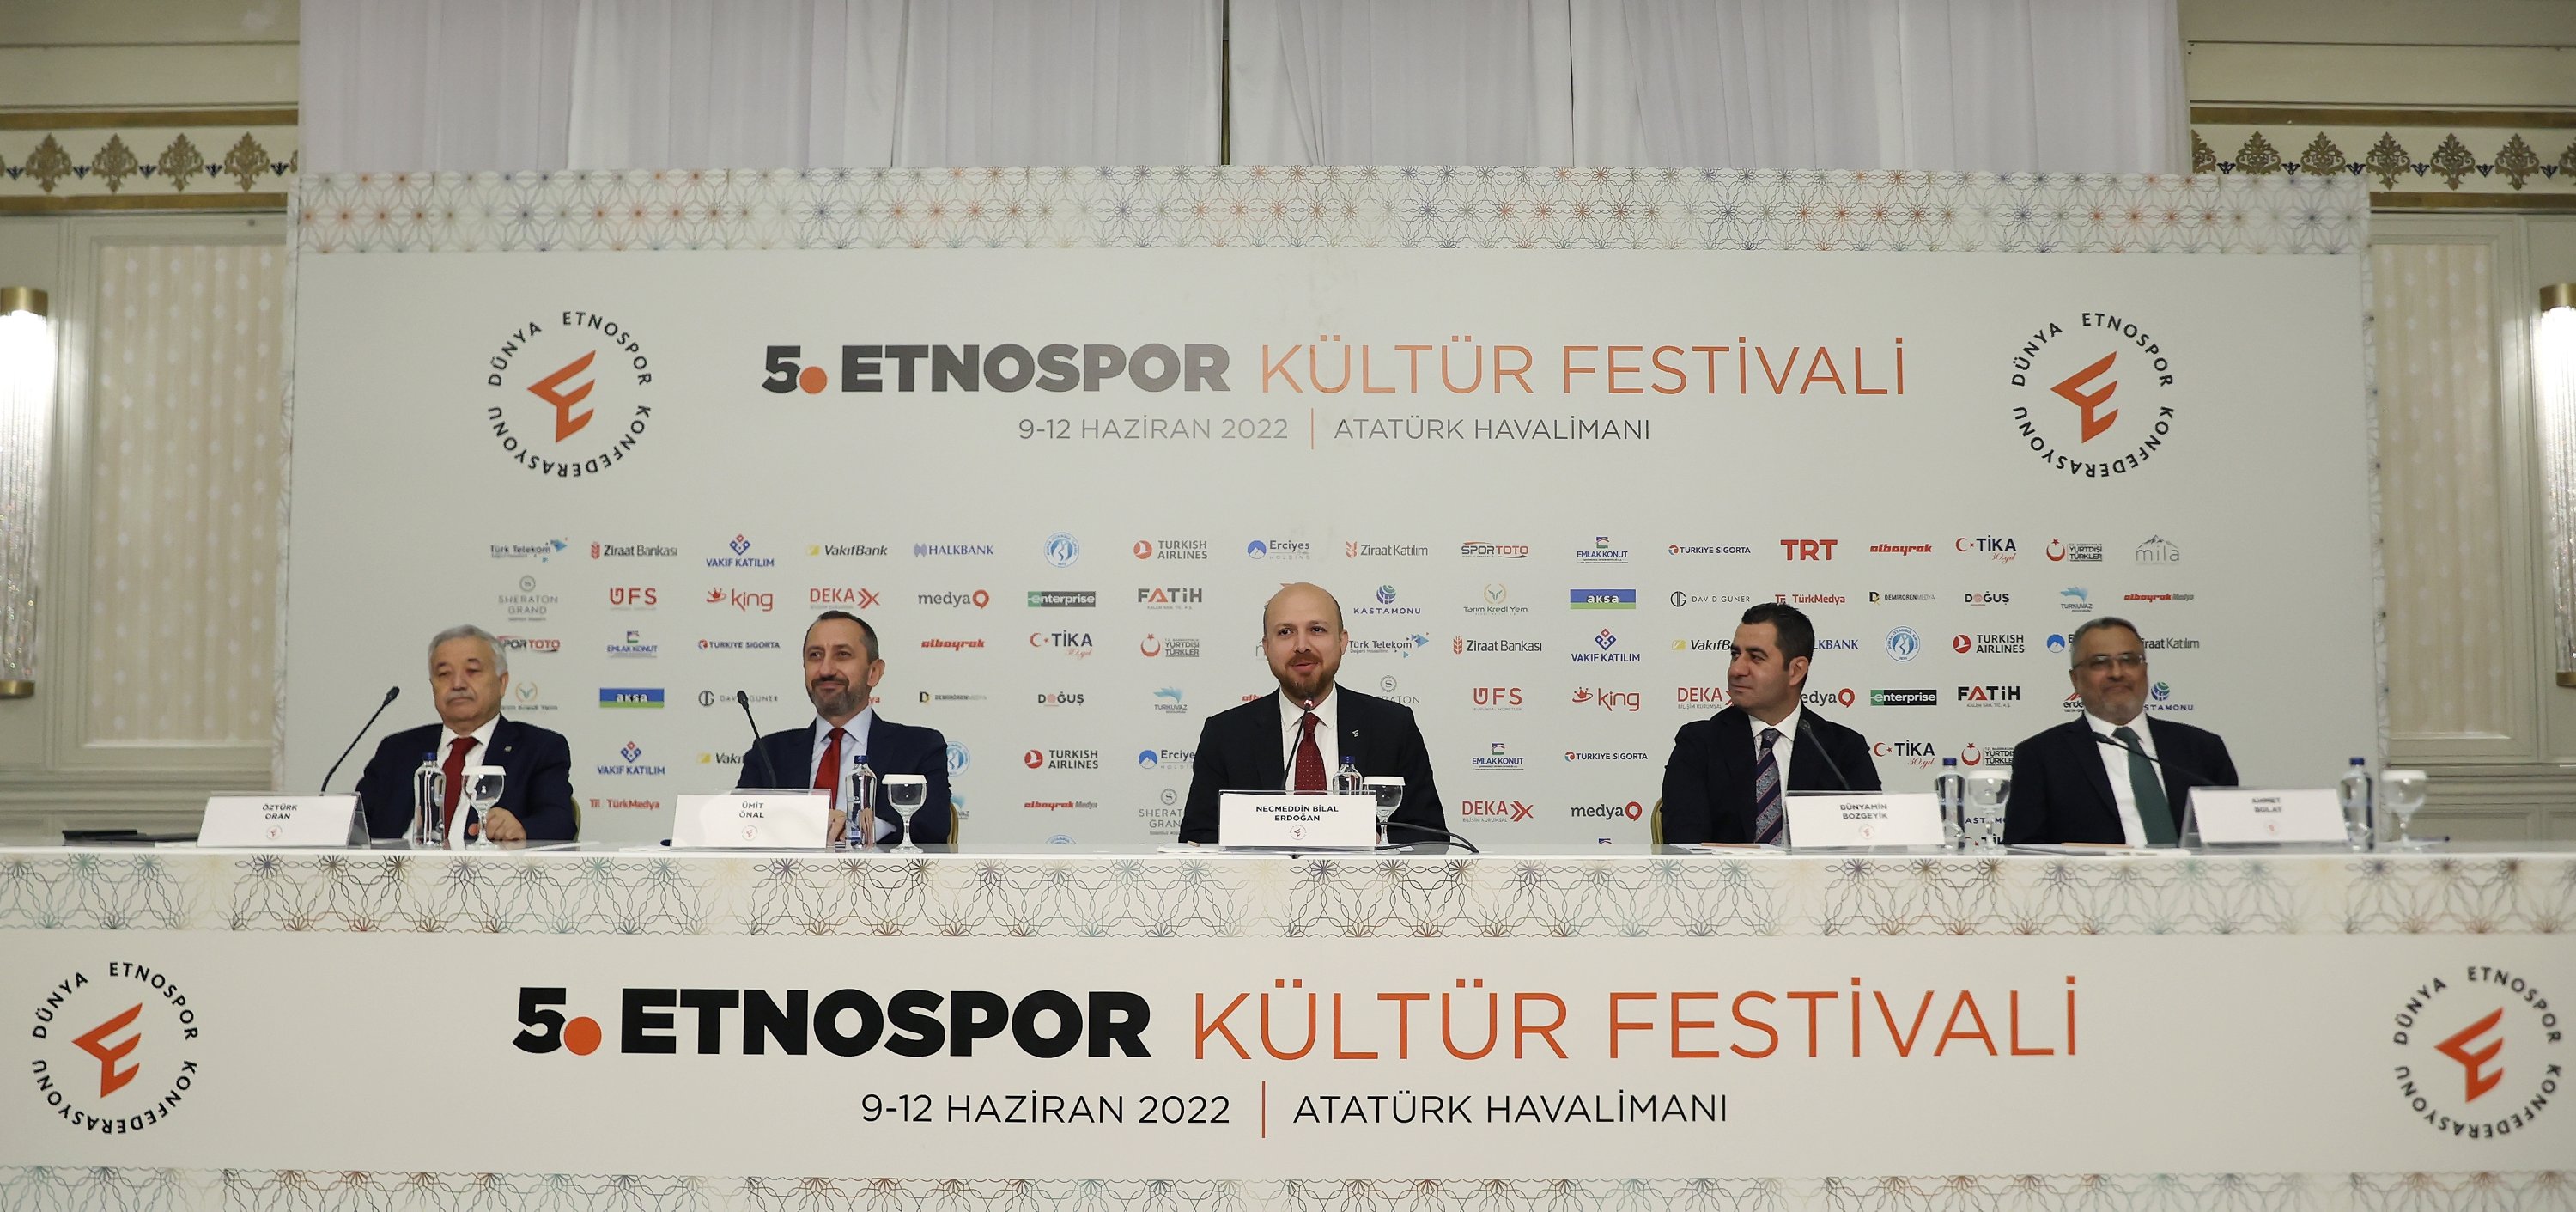 World Ethnosport Confederation President Bilal Erdoğan (C) and other guests attend a meet-the-press event for 5th Ethnosports Culture Festival, Istanbul, Turkey, June 7, 2022.